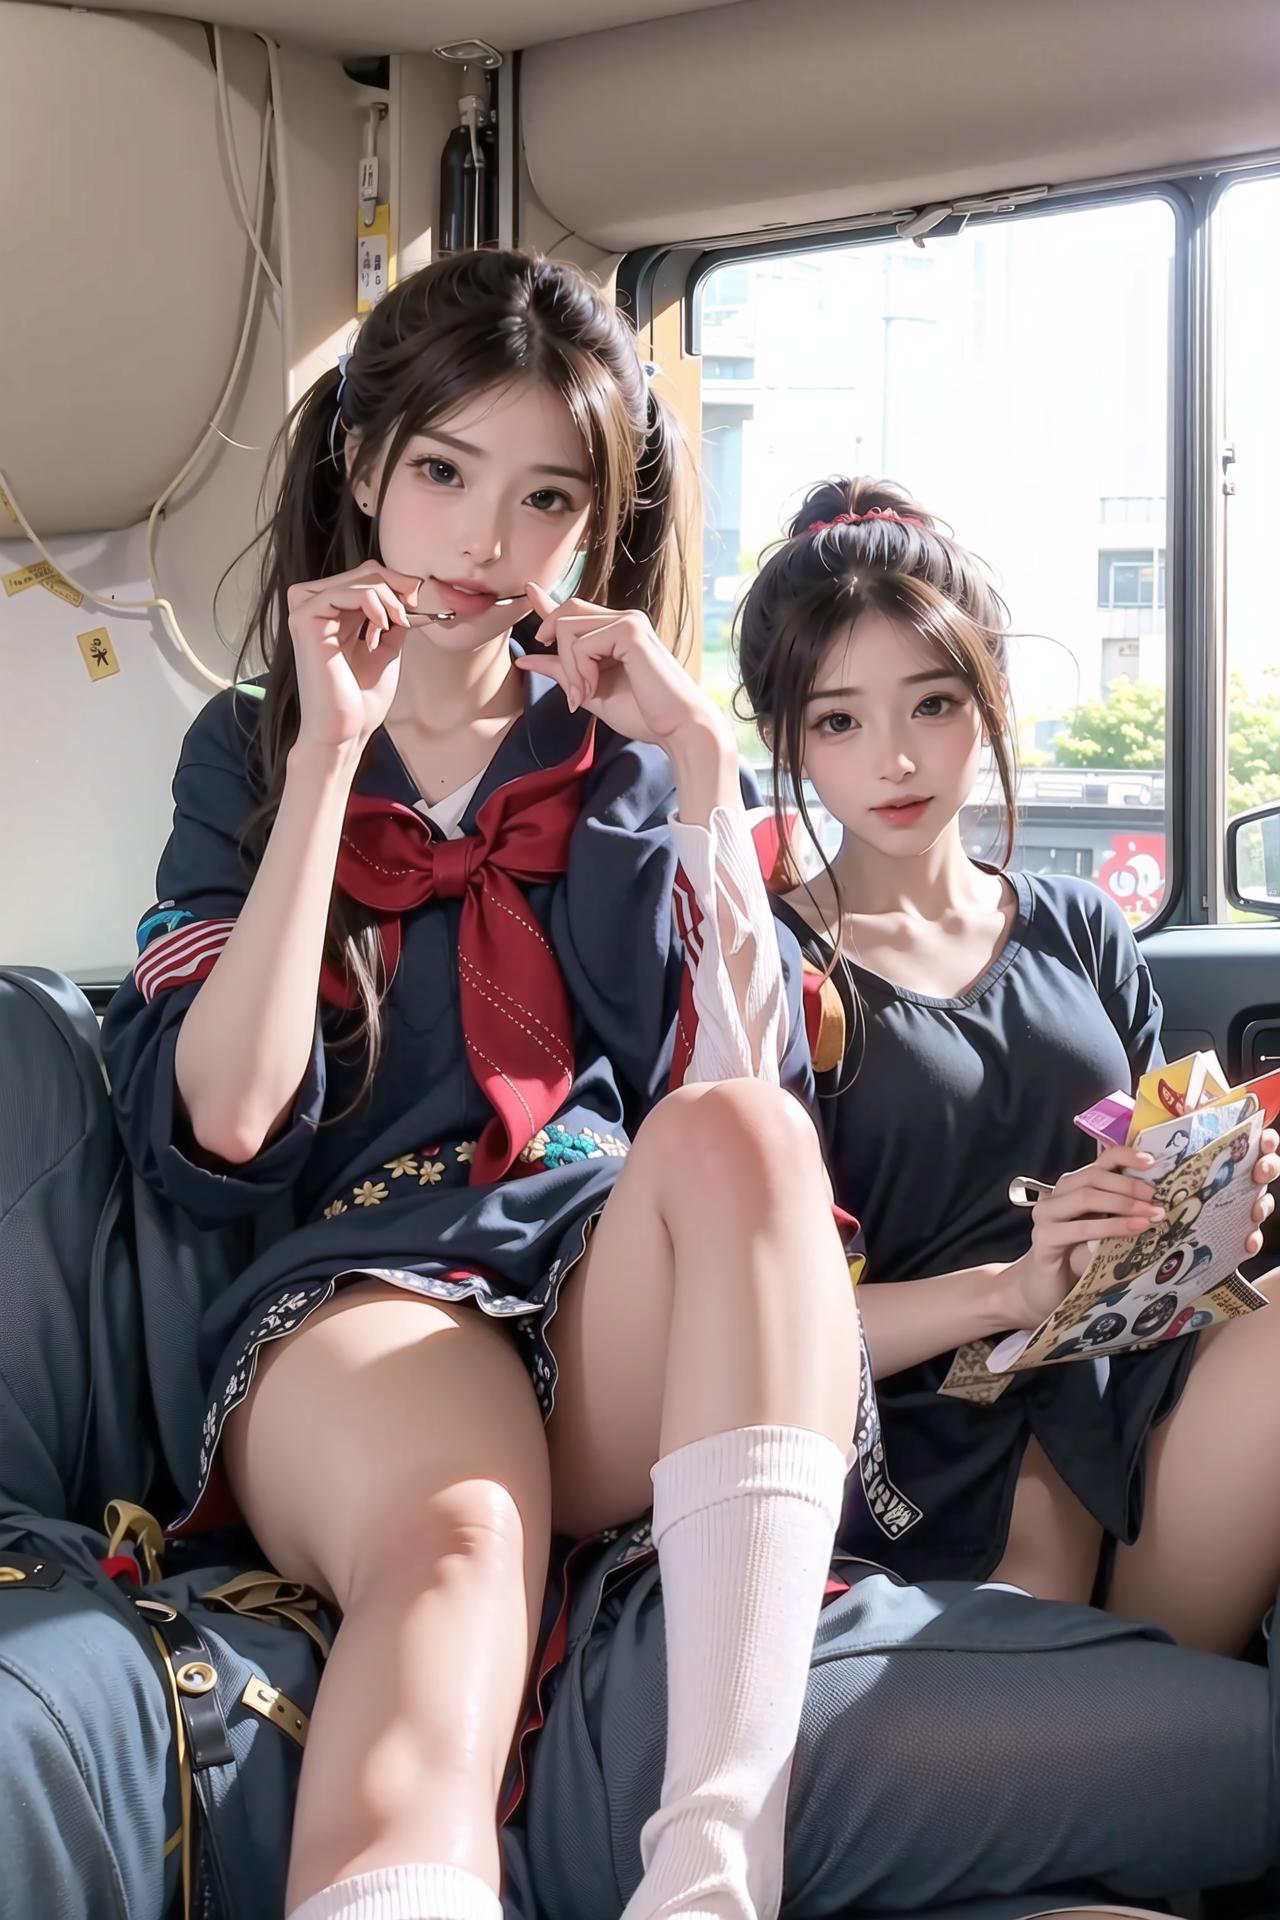 The two beautiful girls are sitting on the back of a bus.